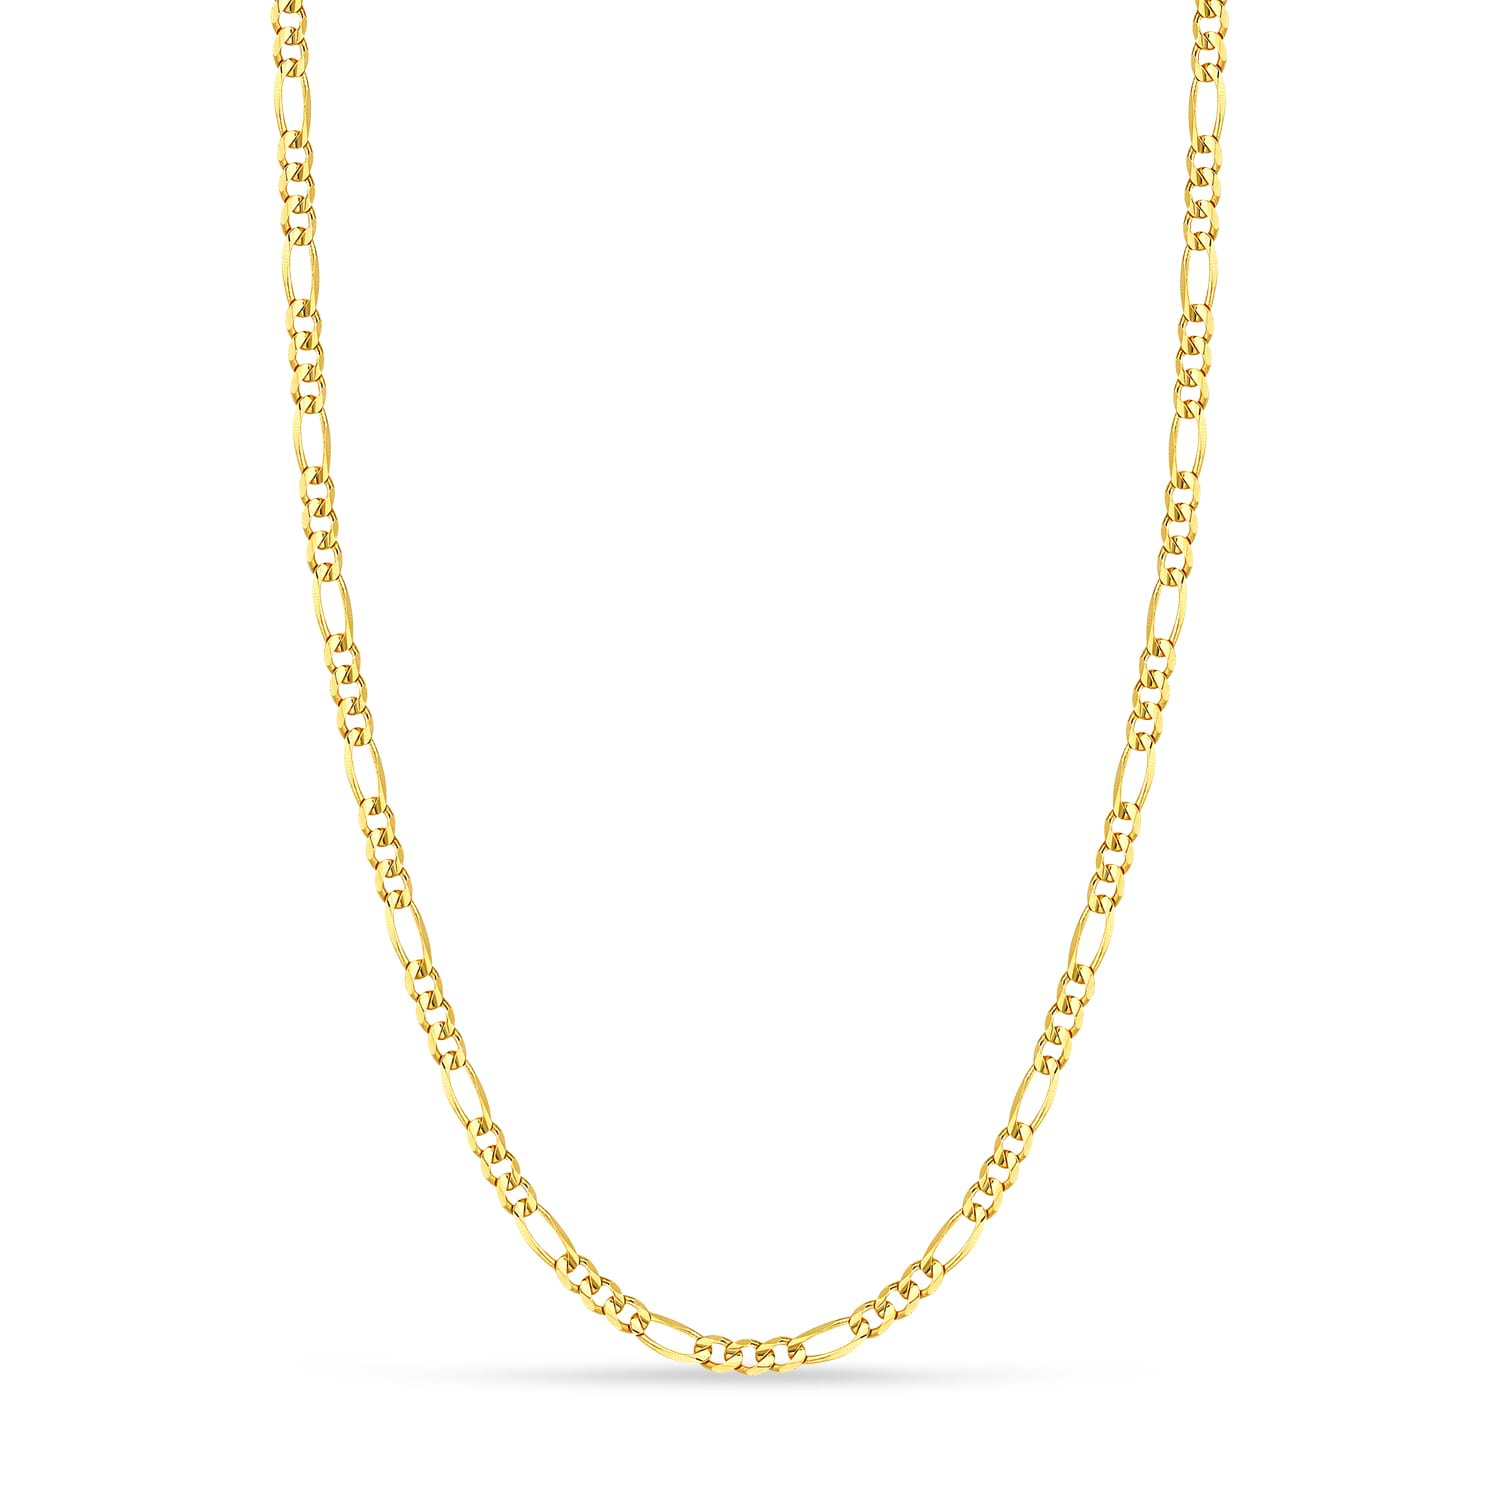 Figaro Chain Necklace With Lobster Lock 14k Yellow Gold